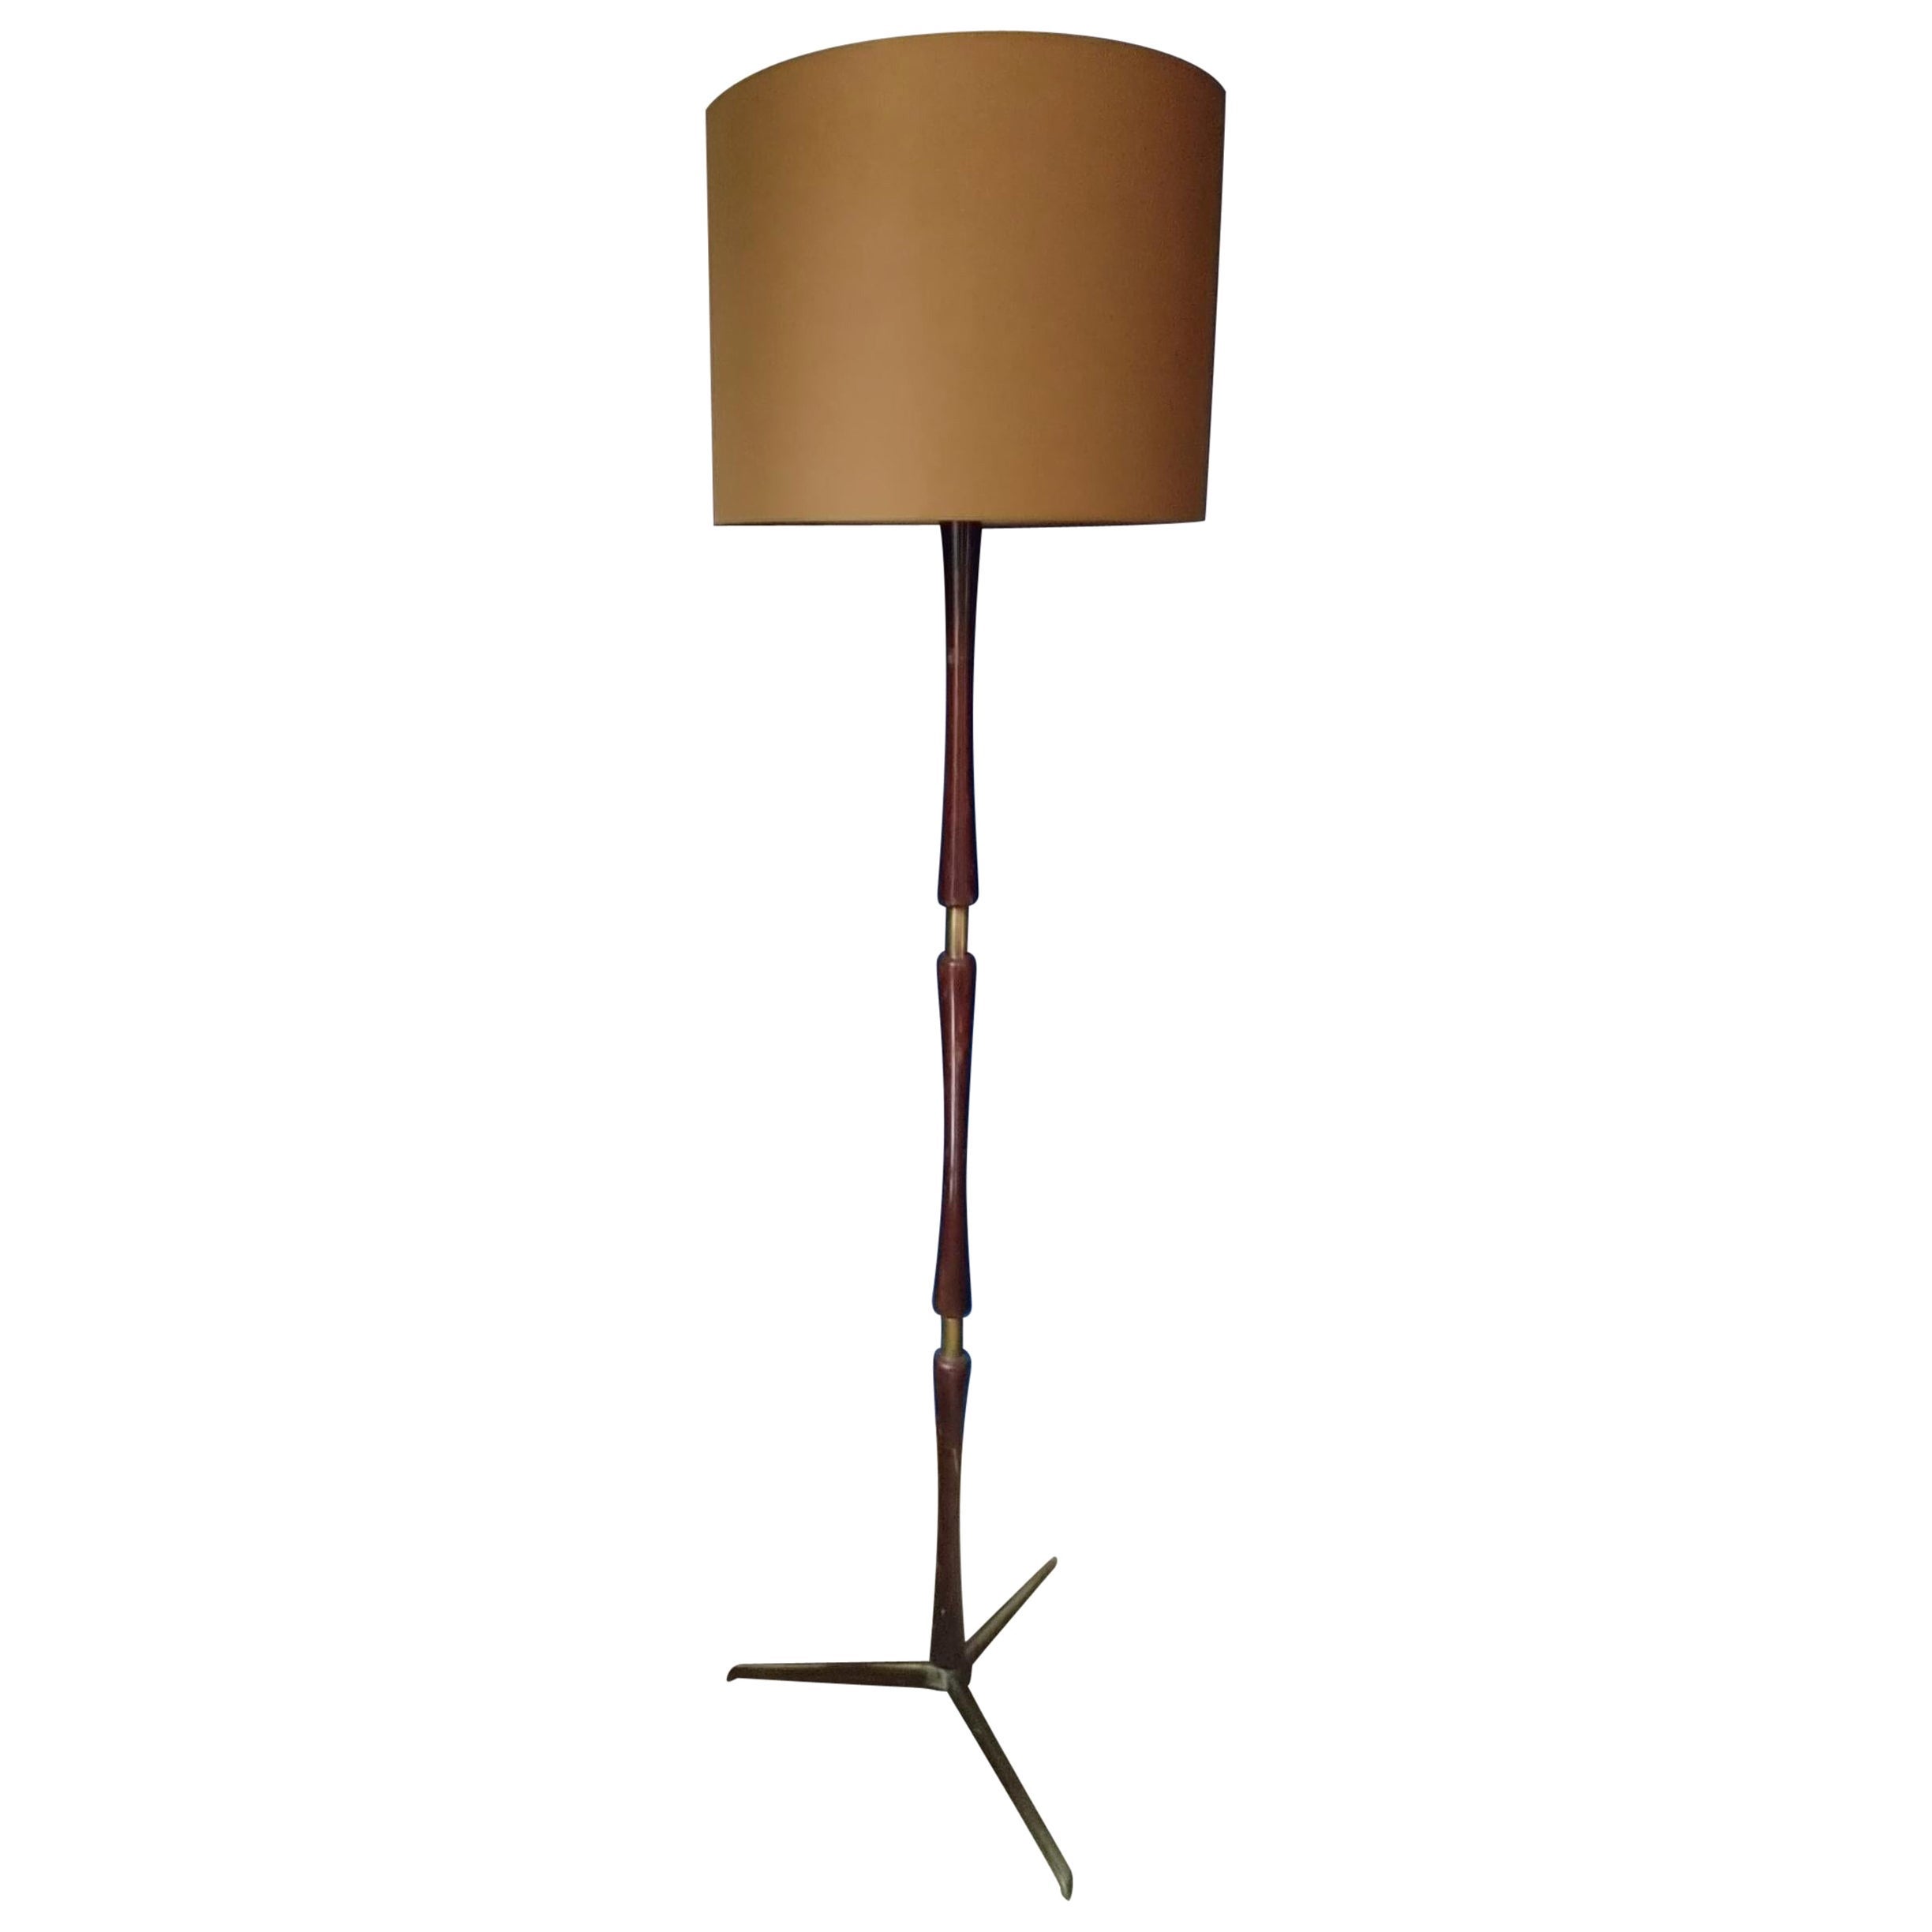 1930s Art Deco Floor Lamp in Brass and Wood For Sale